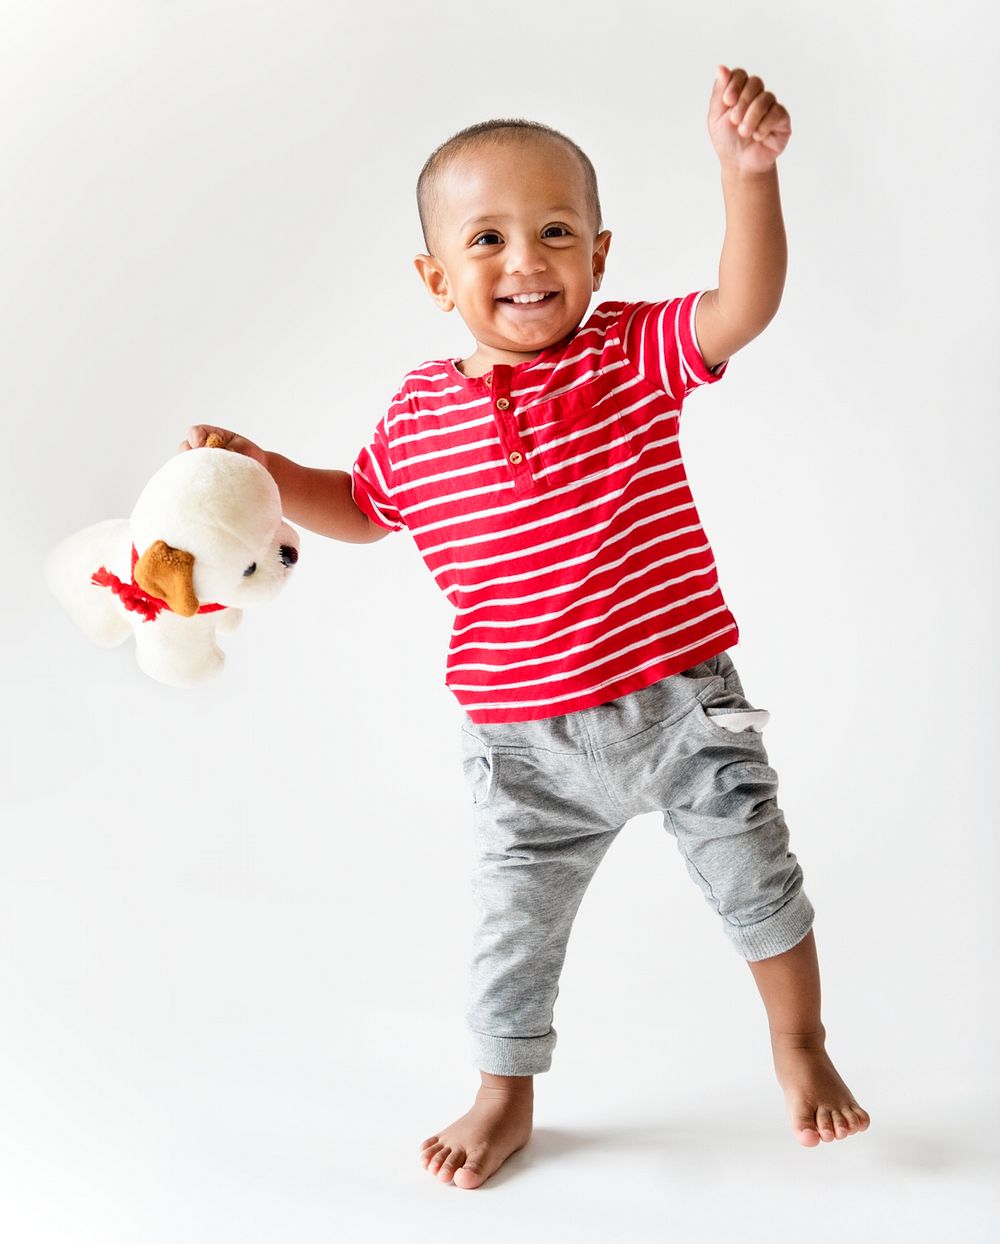 Cheerful young boy holding a soft toy